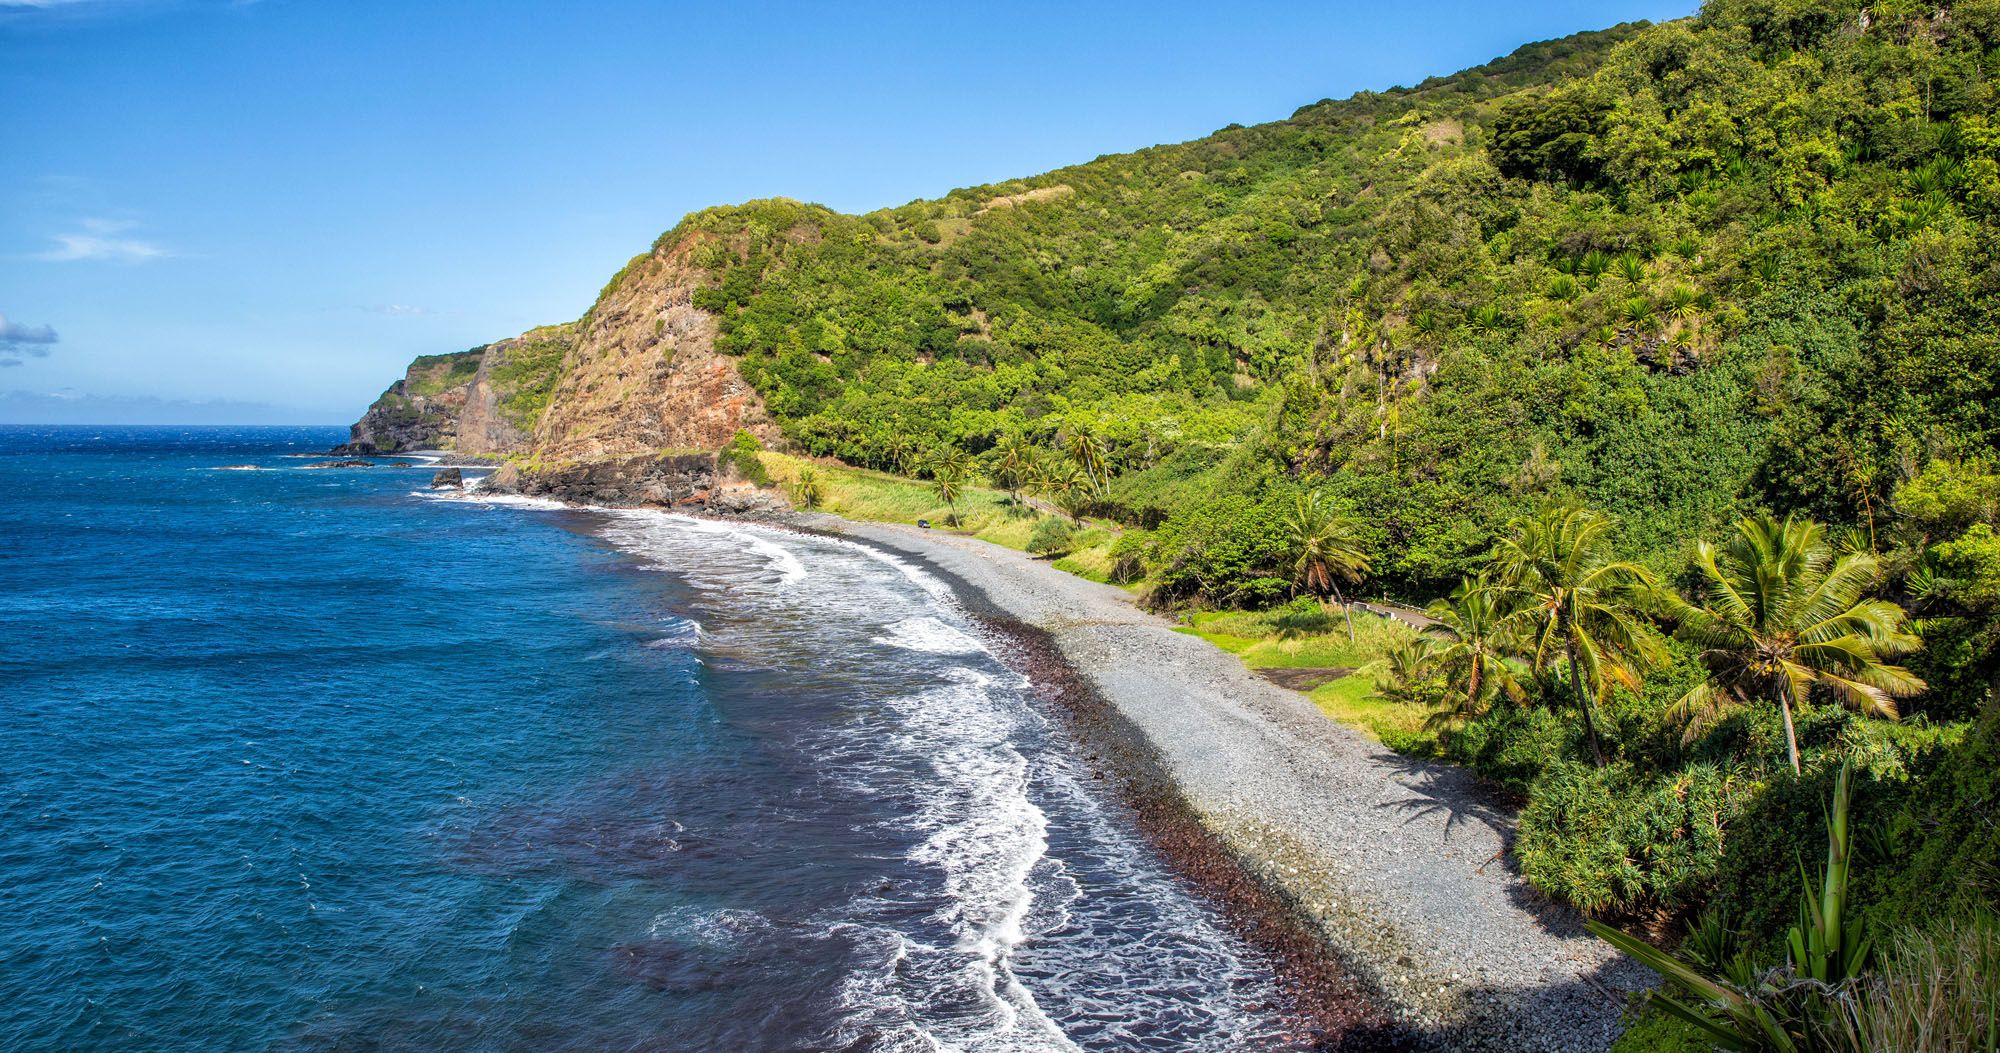 Featured image for “Road to Hana: Best Things to Do, Map, Photos & is It Worth It?”